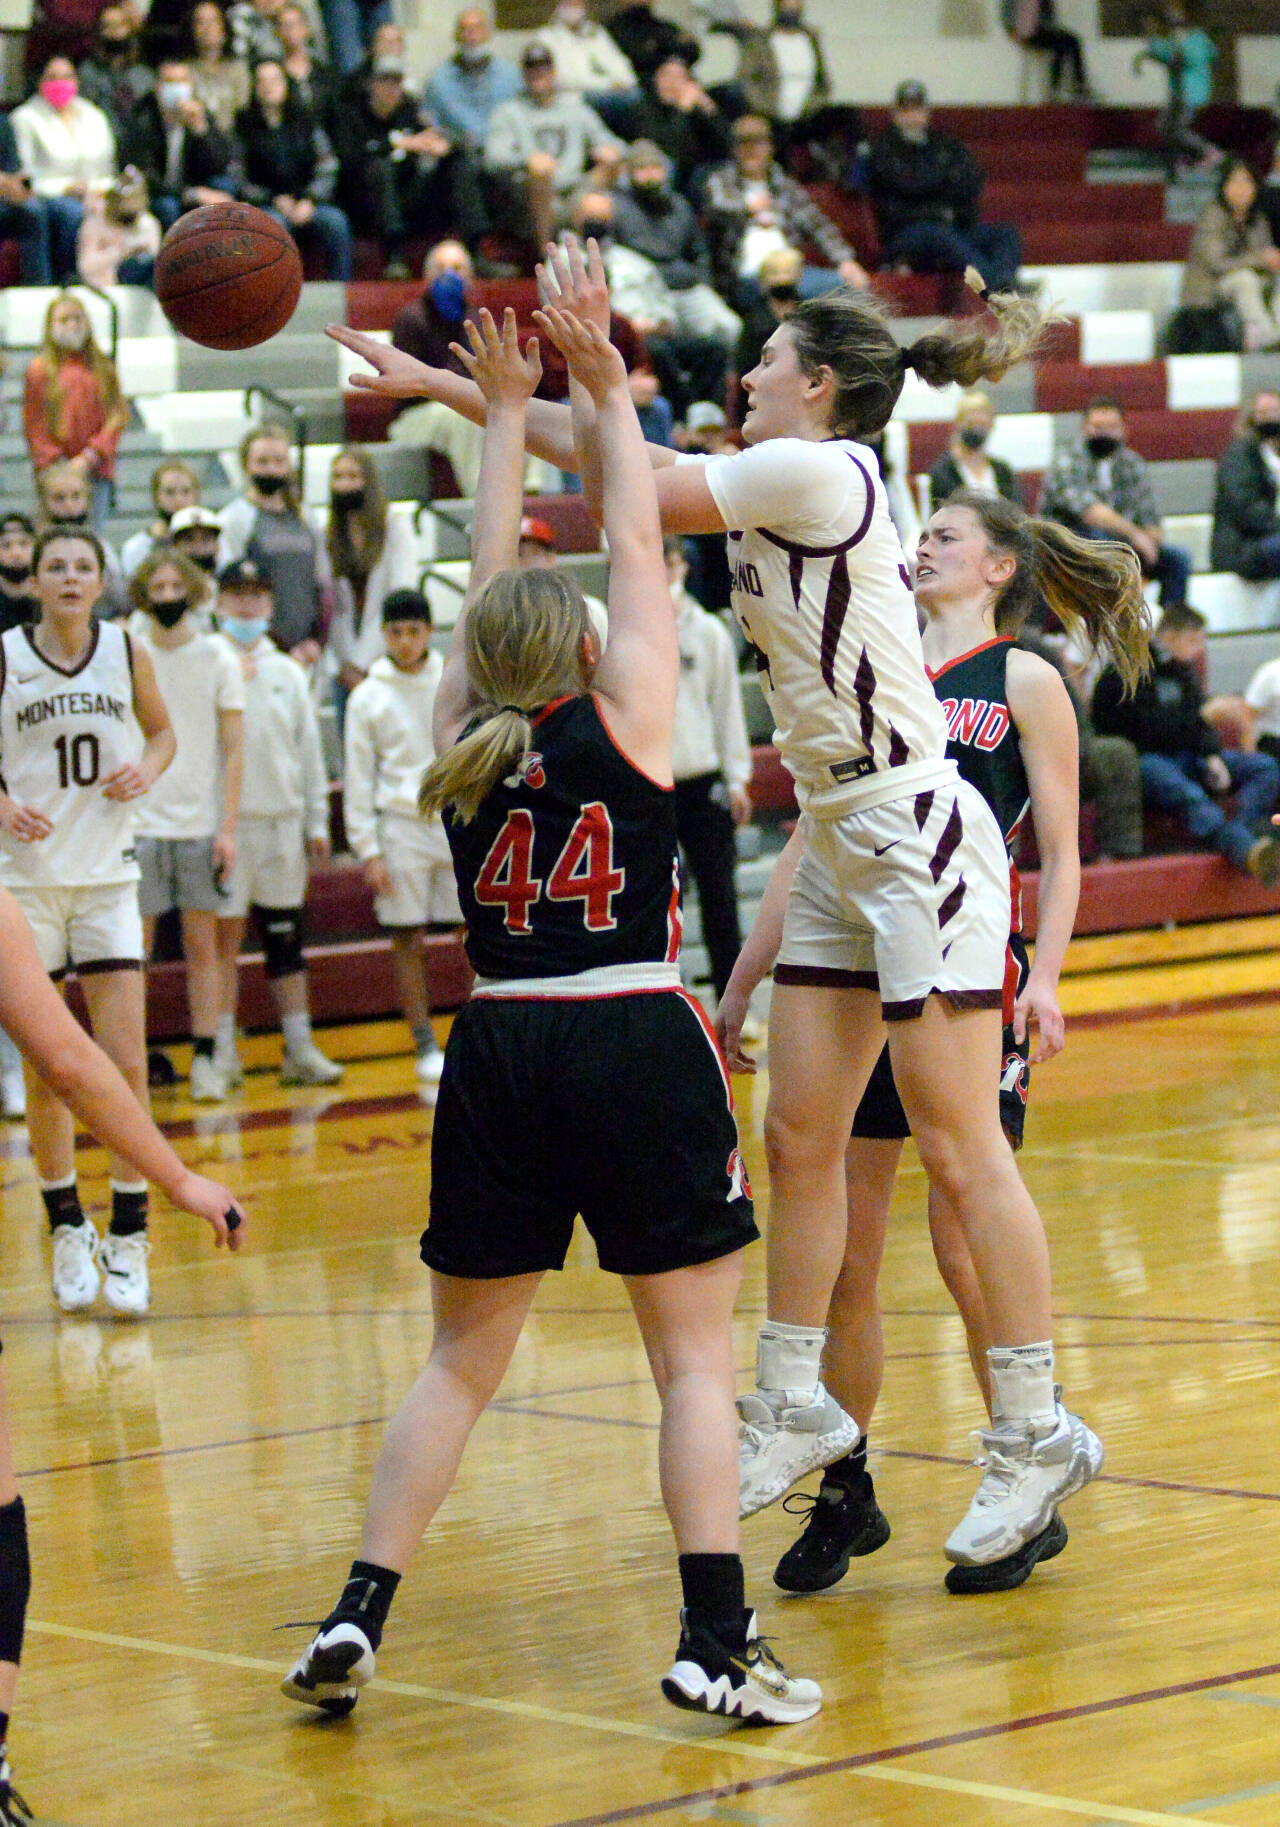 RYAN SPARKS | THE DAILY WORLD Montesano junior McKynnlie Dalan makes a pass while defended by Raymond’s Grace Busenius (44) during the Bulldogs 54-51 victory over Raymond on Friday in Montesano. Dalan scored 24 points and grabbed 15 rebounds to lead Monte to a come-from-behind victory.